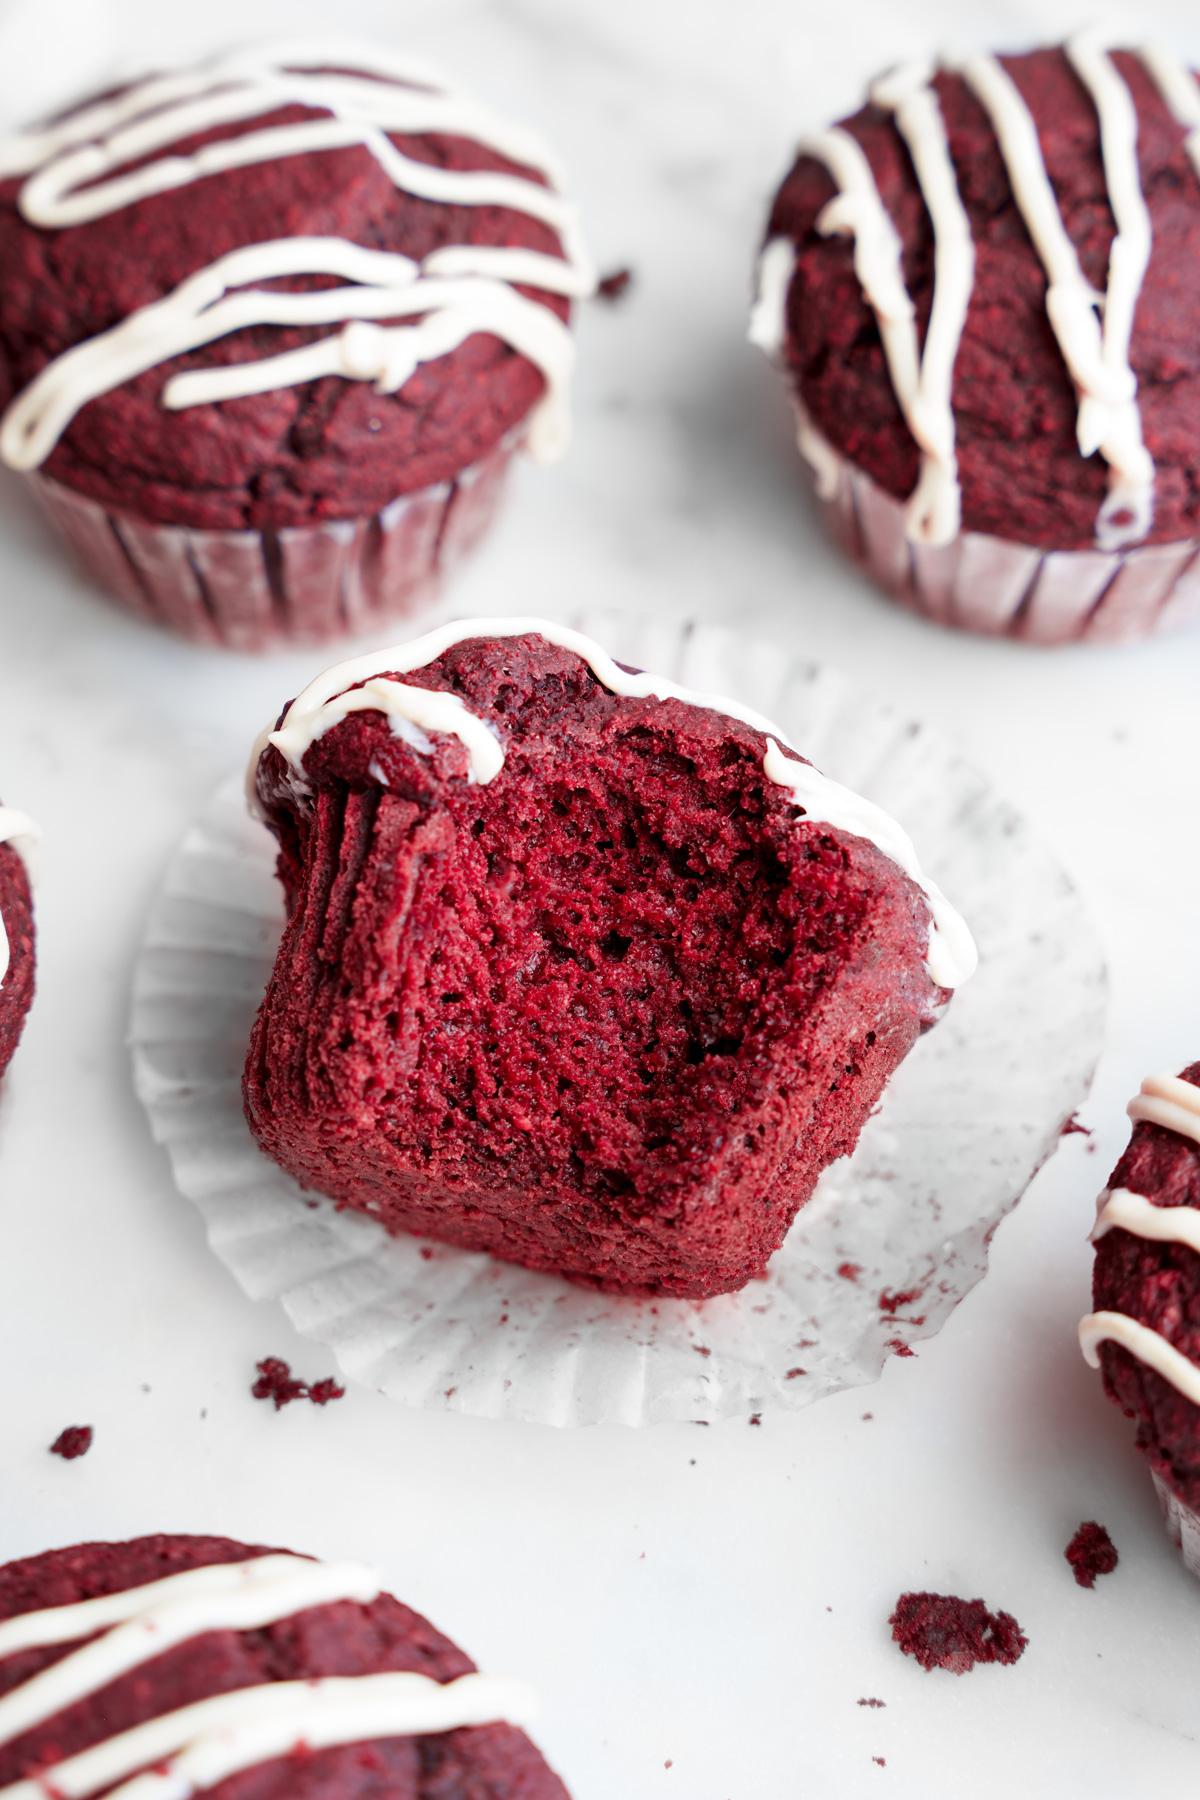 the red velvet muffins with a bite taken out of the muffins